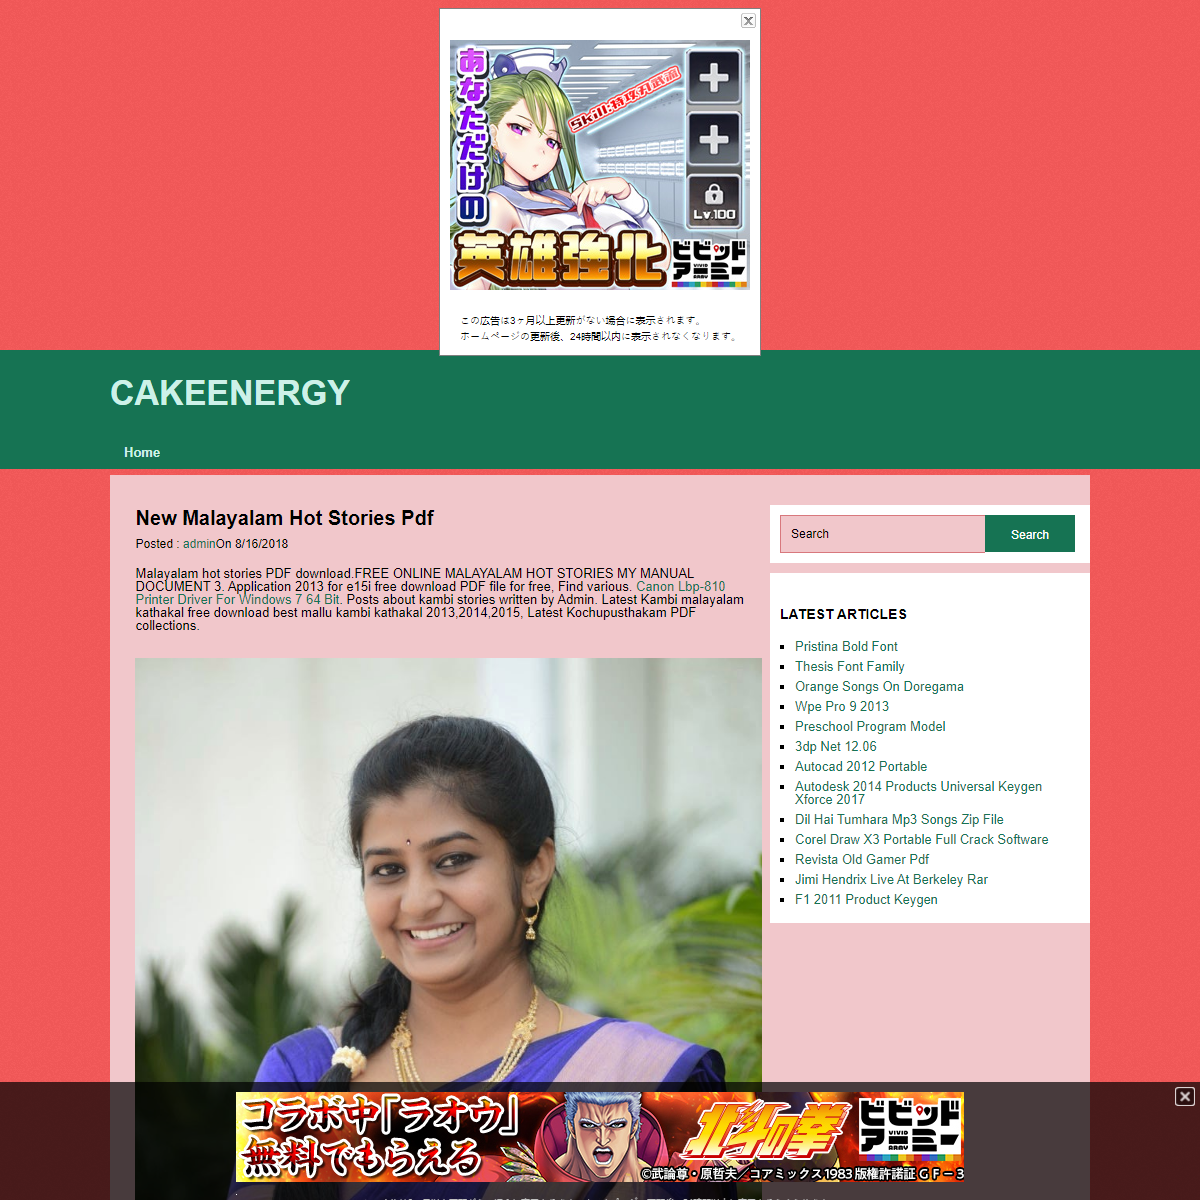 A complete backup of https://cakeenergy.web.fc2.com/new-malayalam-hot-stories-pdf.html